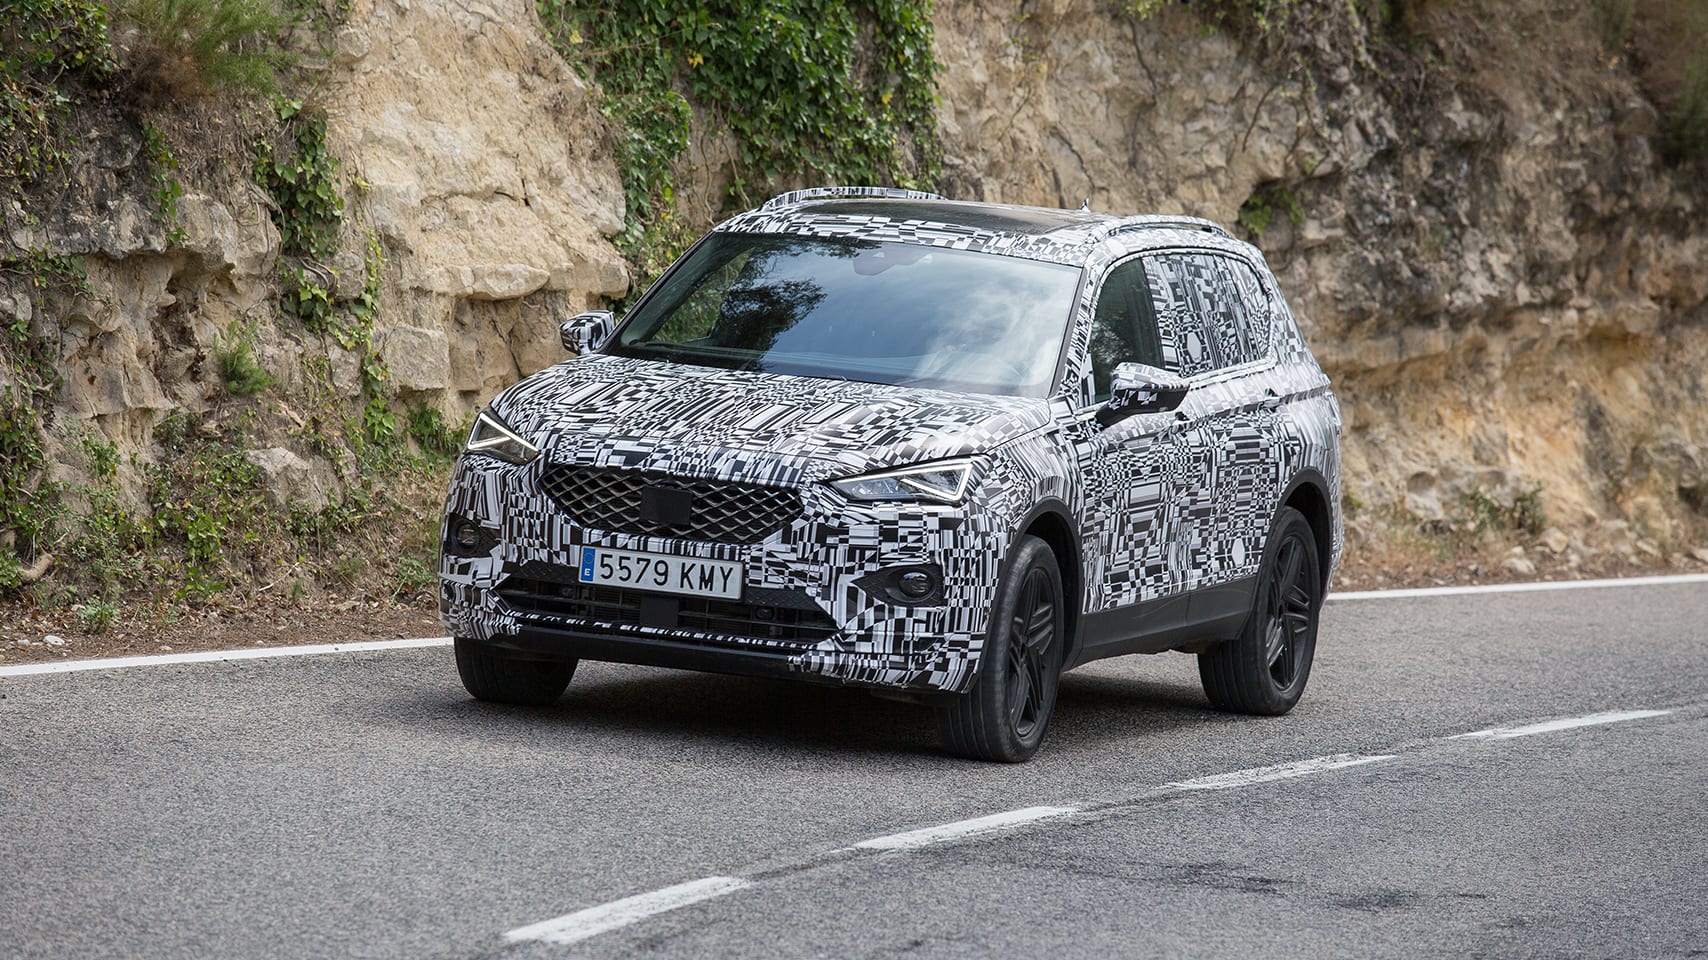 On and off-road test driving the new SEAT Tarraco large SUV